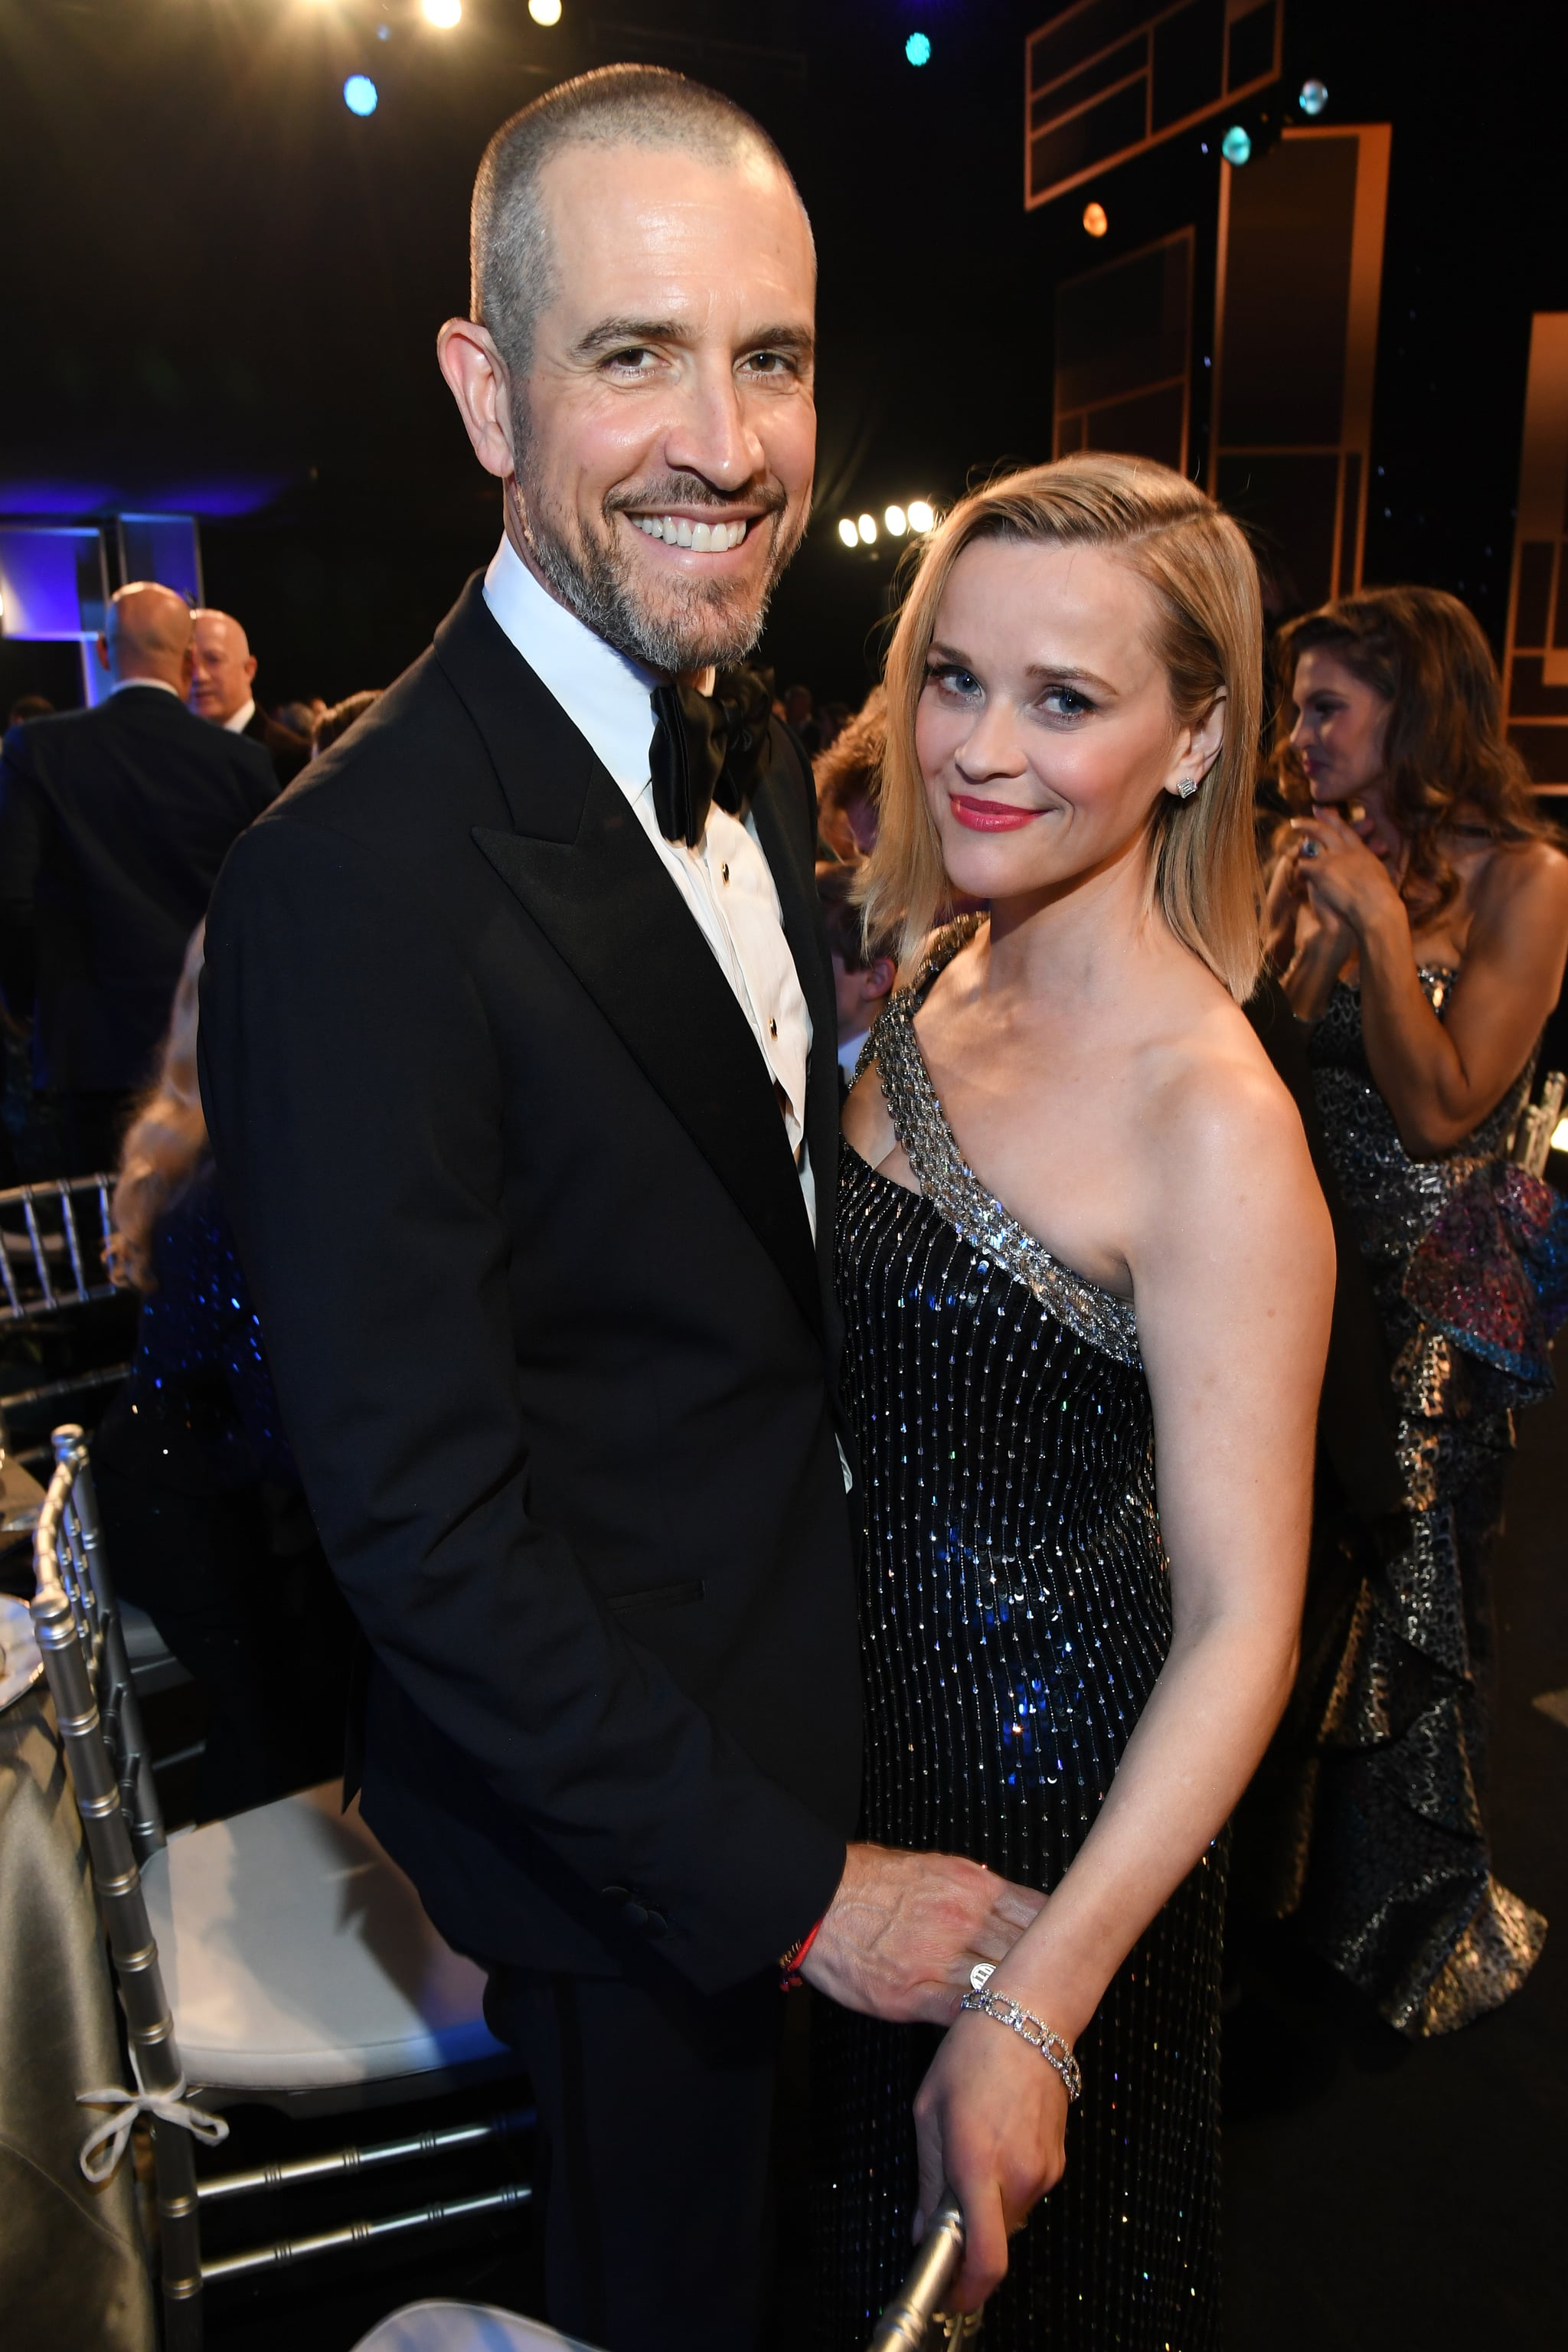 LOS ANGELES, CALIFORNIA - JANUARY 19: (L-R) Jim Toth and Reese Witherspoon attend the 26th Annual Screen Actors Guild Awards at The Shrine Auditorium on January 19, 2020 in Los Angeles, California. 721336 (Photo by Kevin Mazur/Getty Images for Turner)